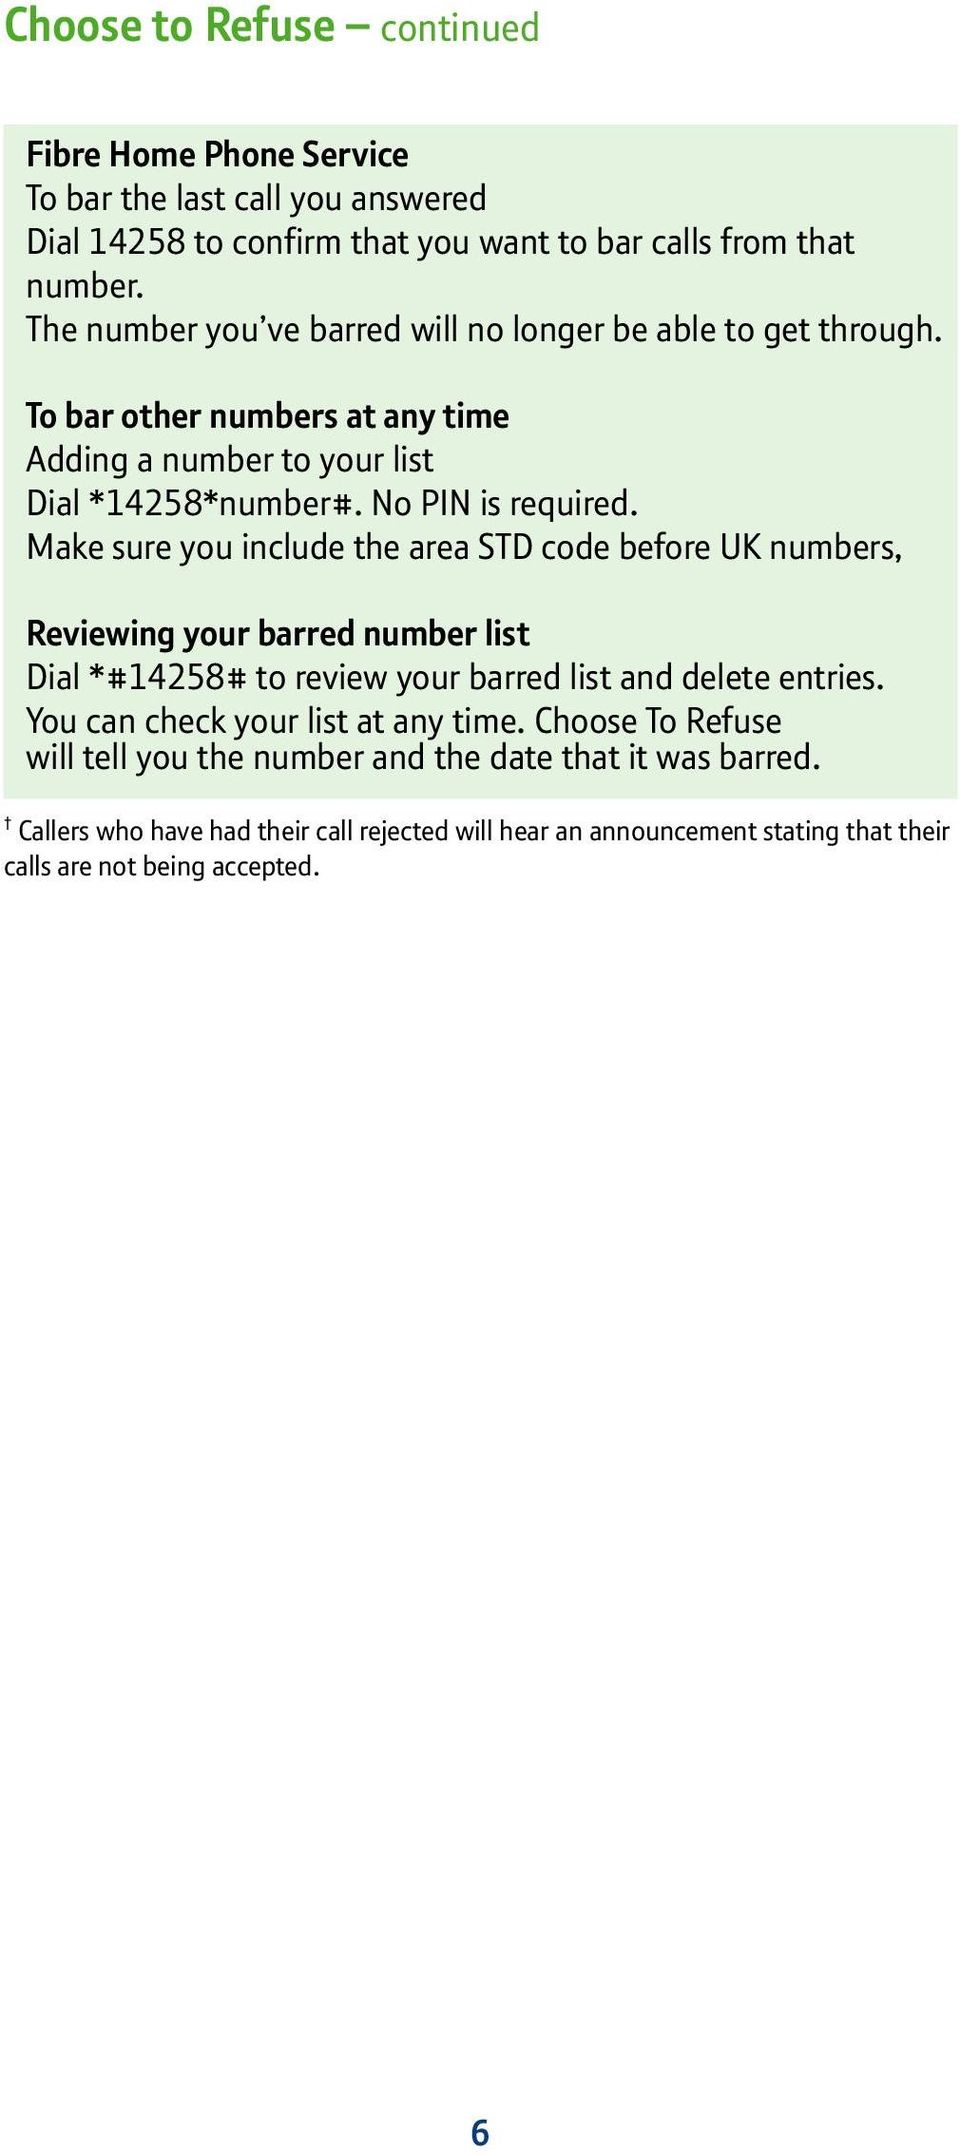 Make sure you include the area STD code before UK numbers, Reviewing your barred number list Dial *#14258# to review your barred list and delete entries.